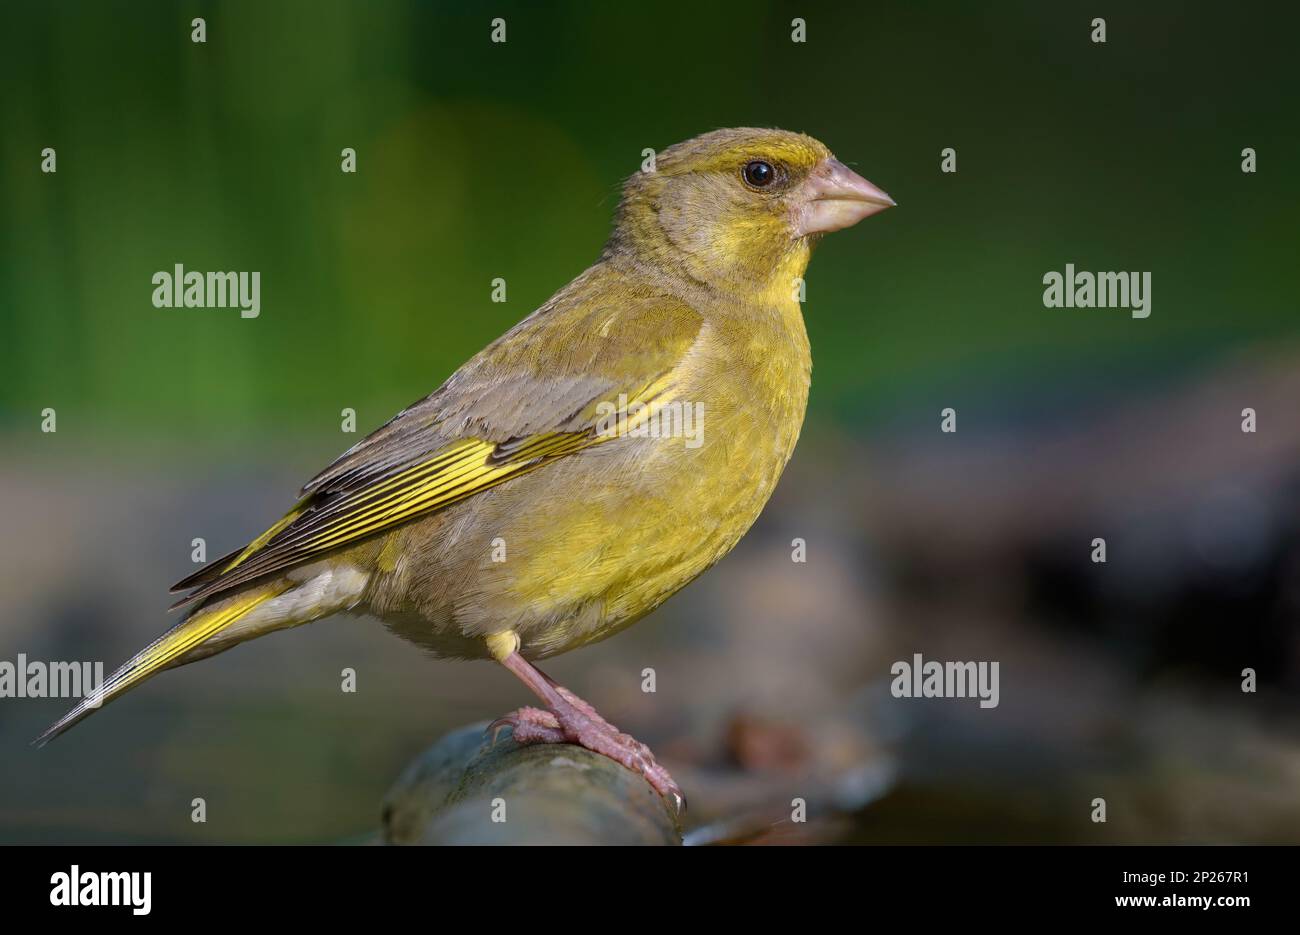 Male European Greenfinch (Chloris chloris) sitting on old branch with green background and sweet morning light Stock Photo